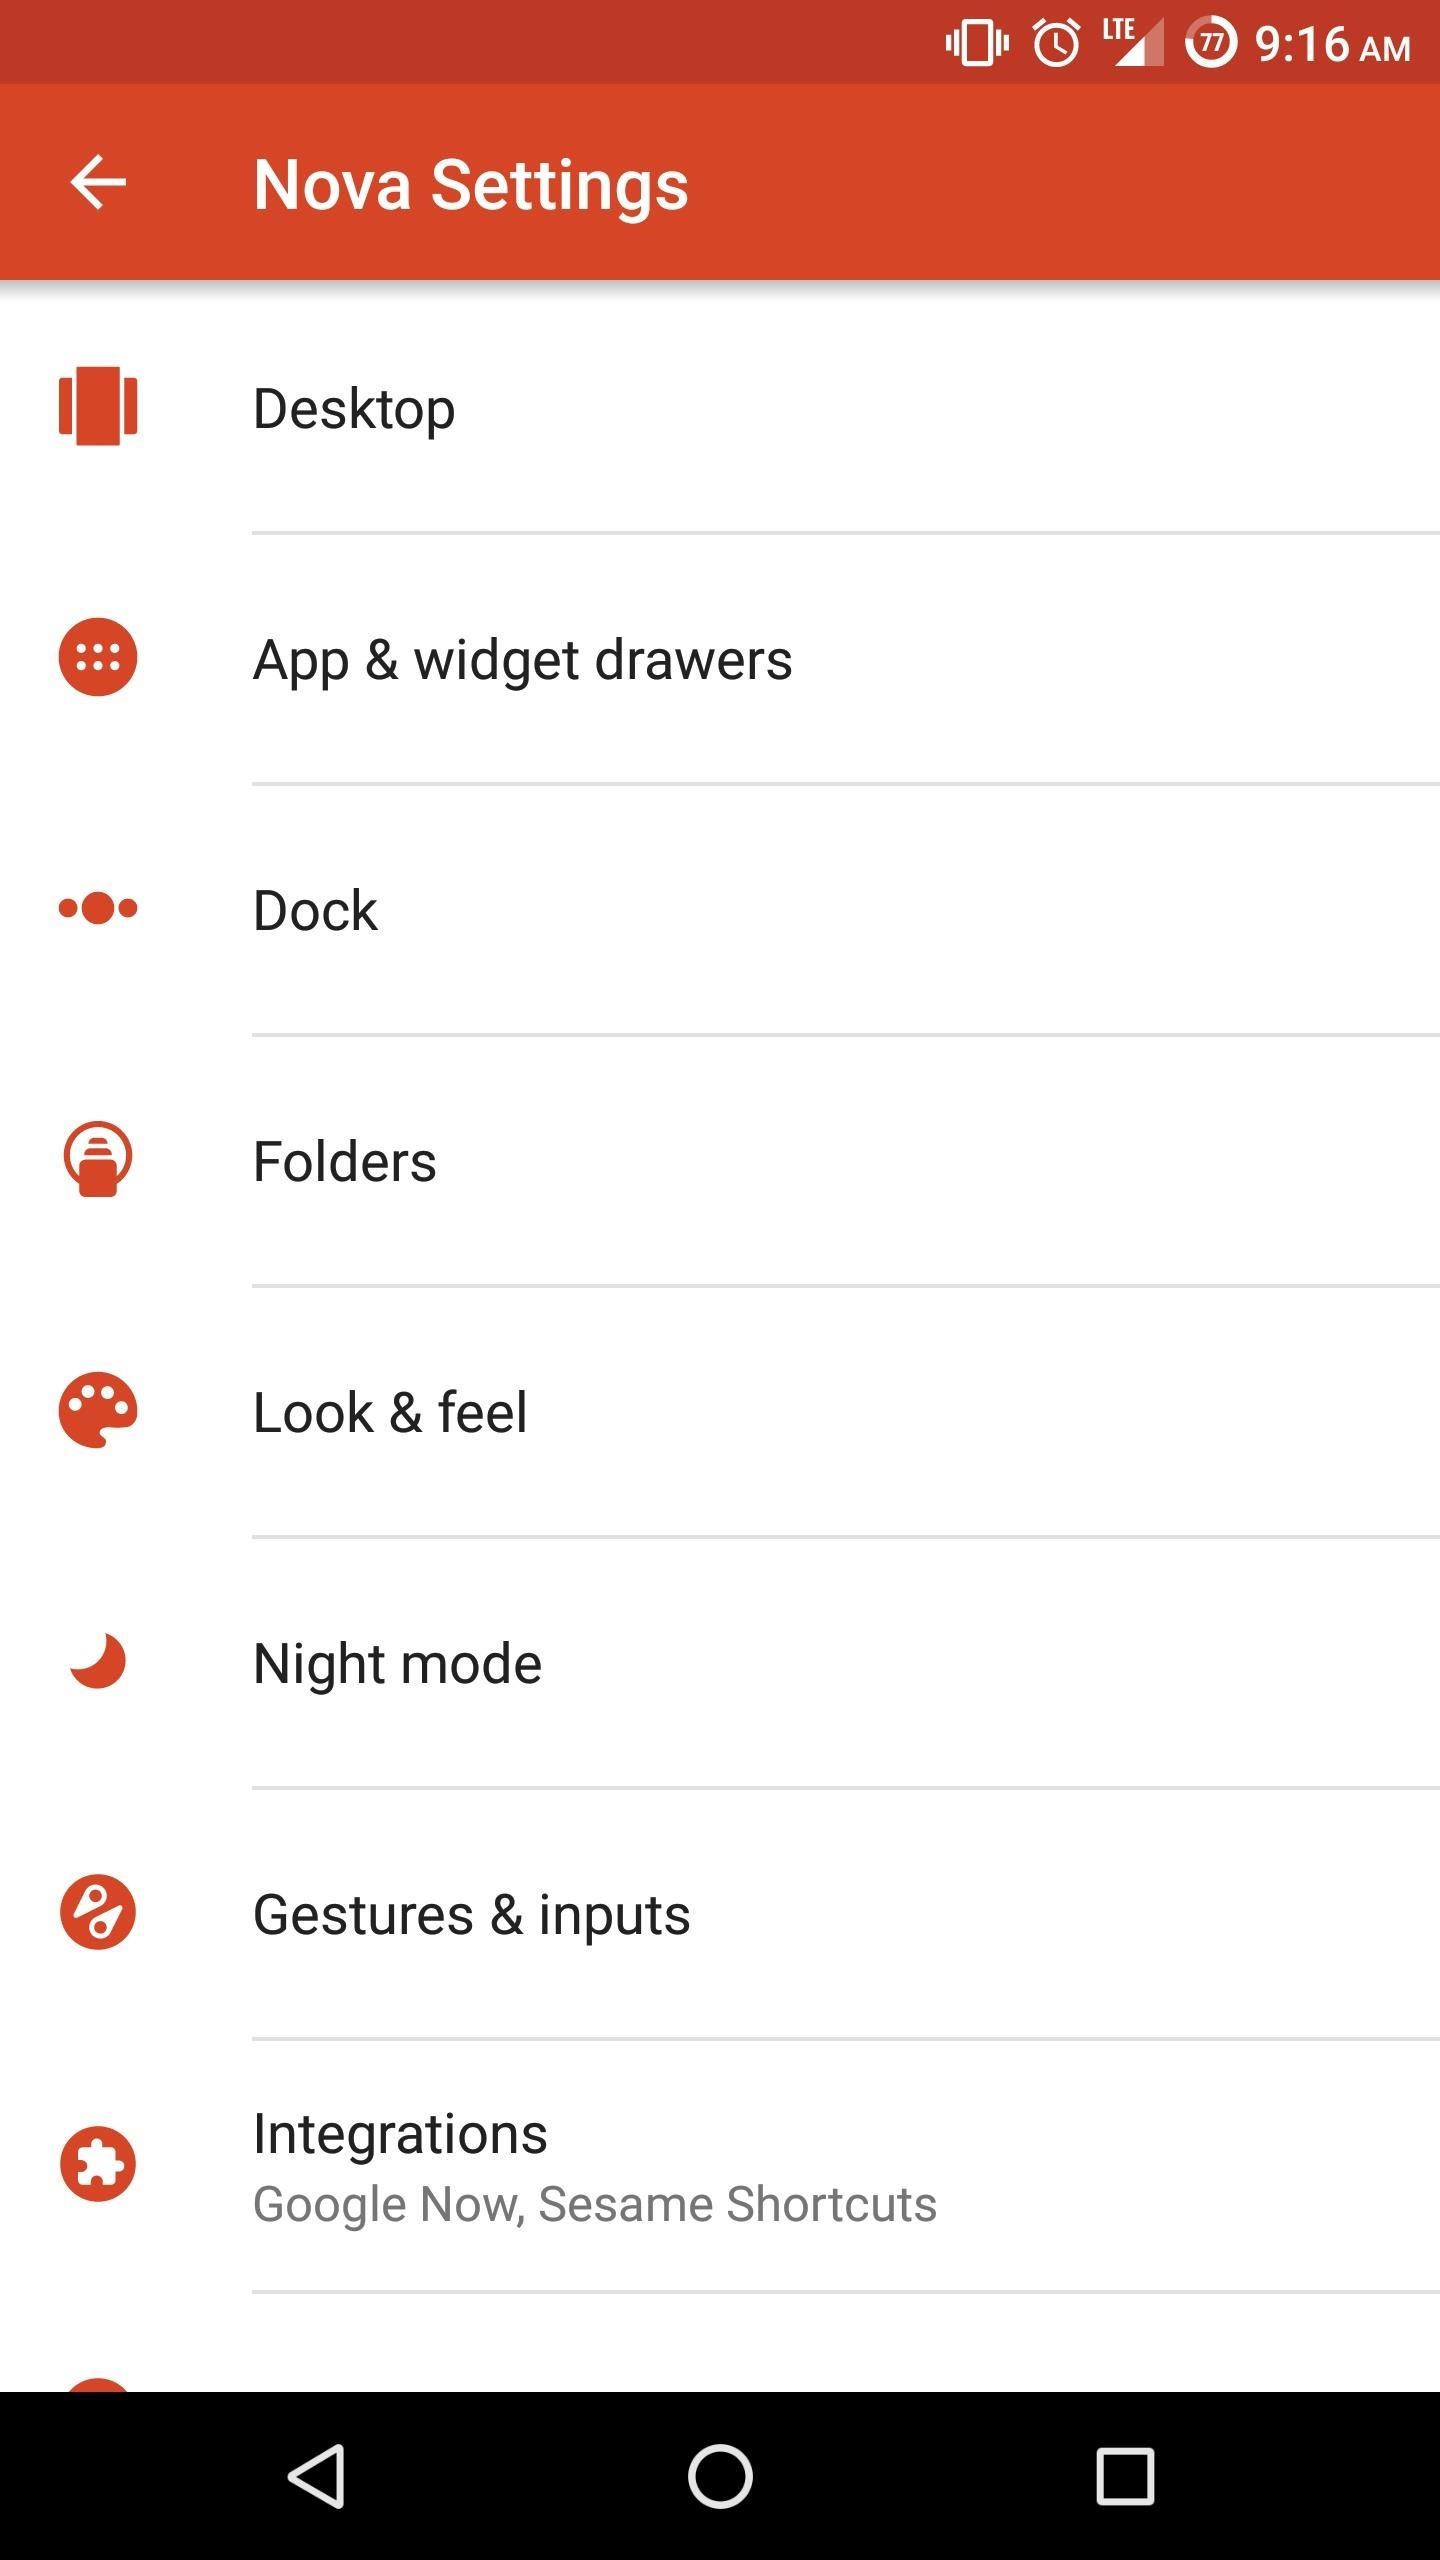 Nova Launcher 101: How to Hide Apps to Remove Icons & Free Up Space in Your App Drawer